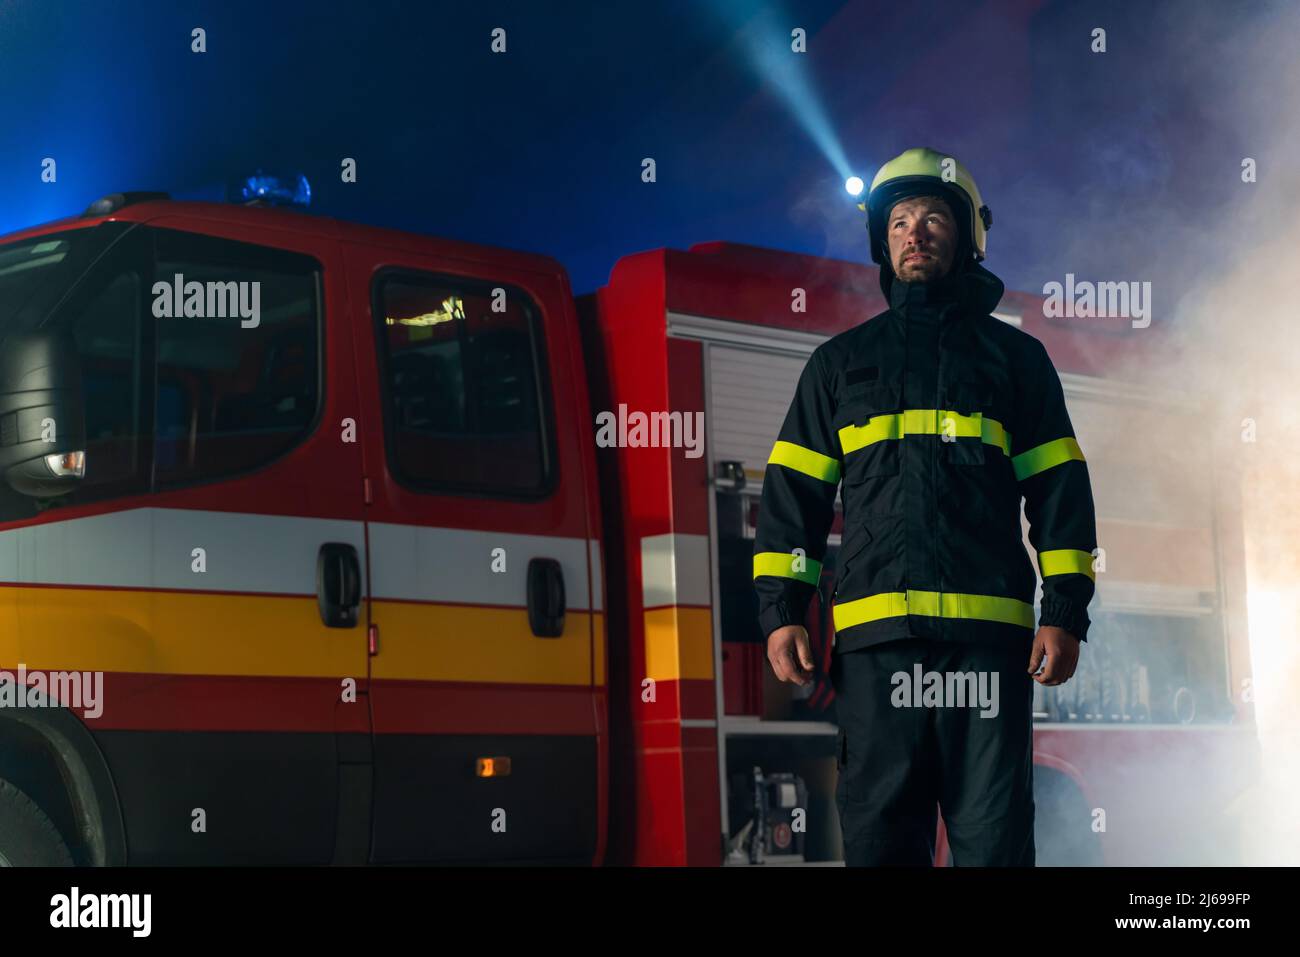 Low angle view of firefighter with fire truck in background at night. Stock Photo